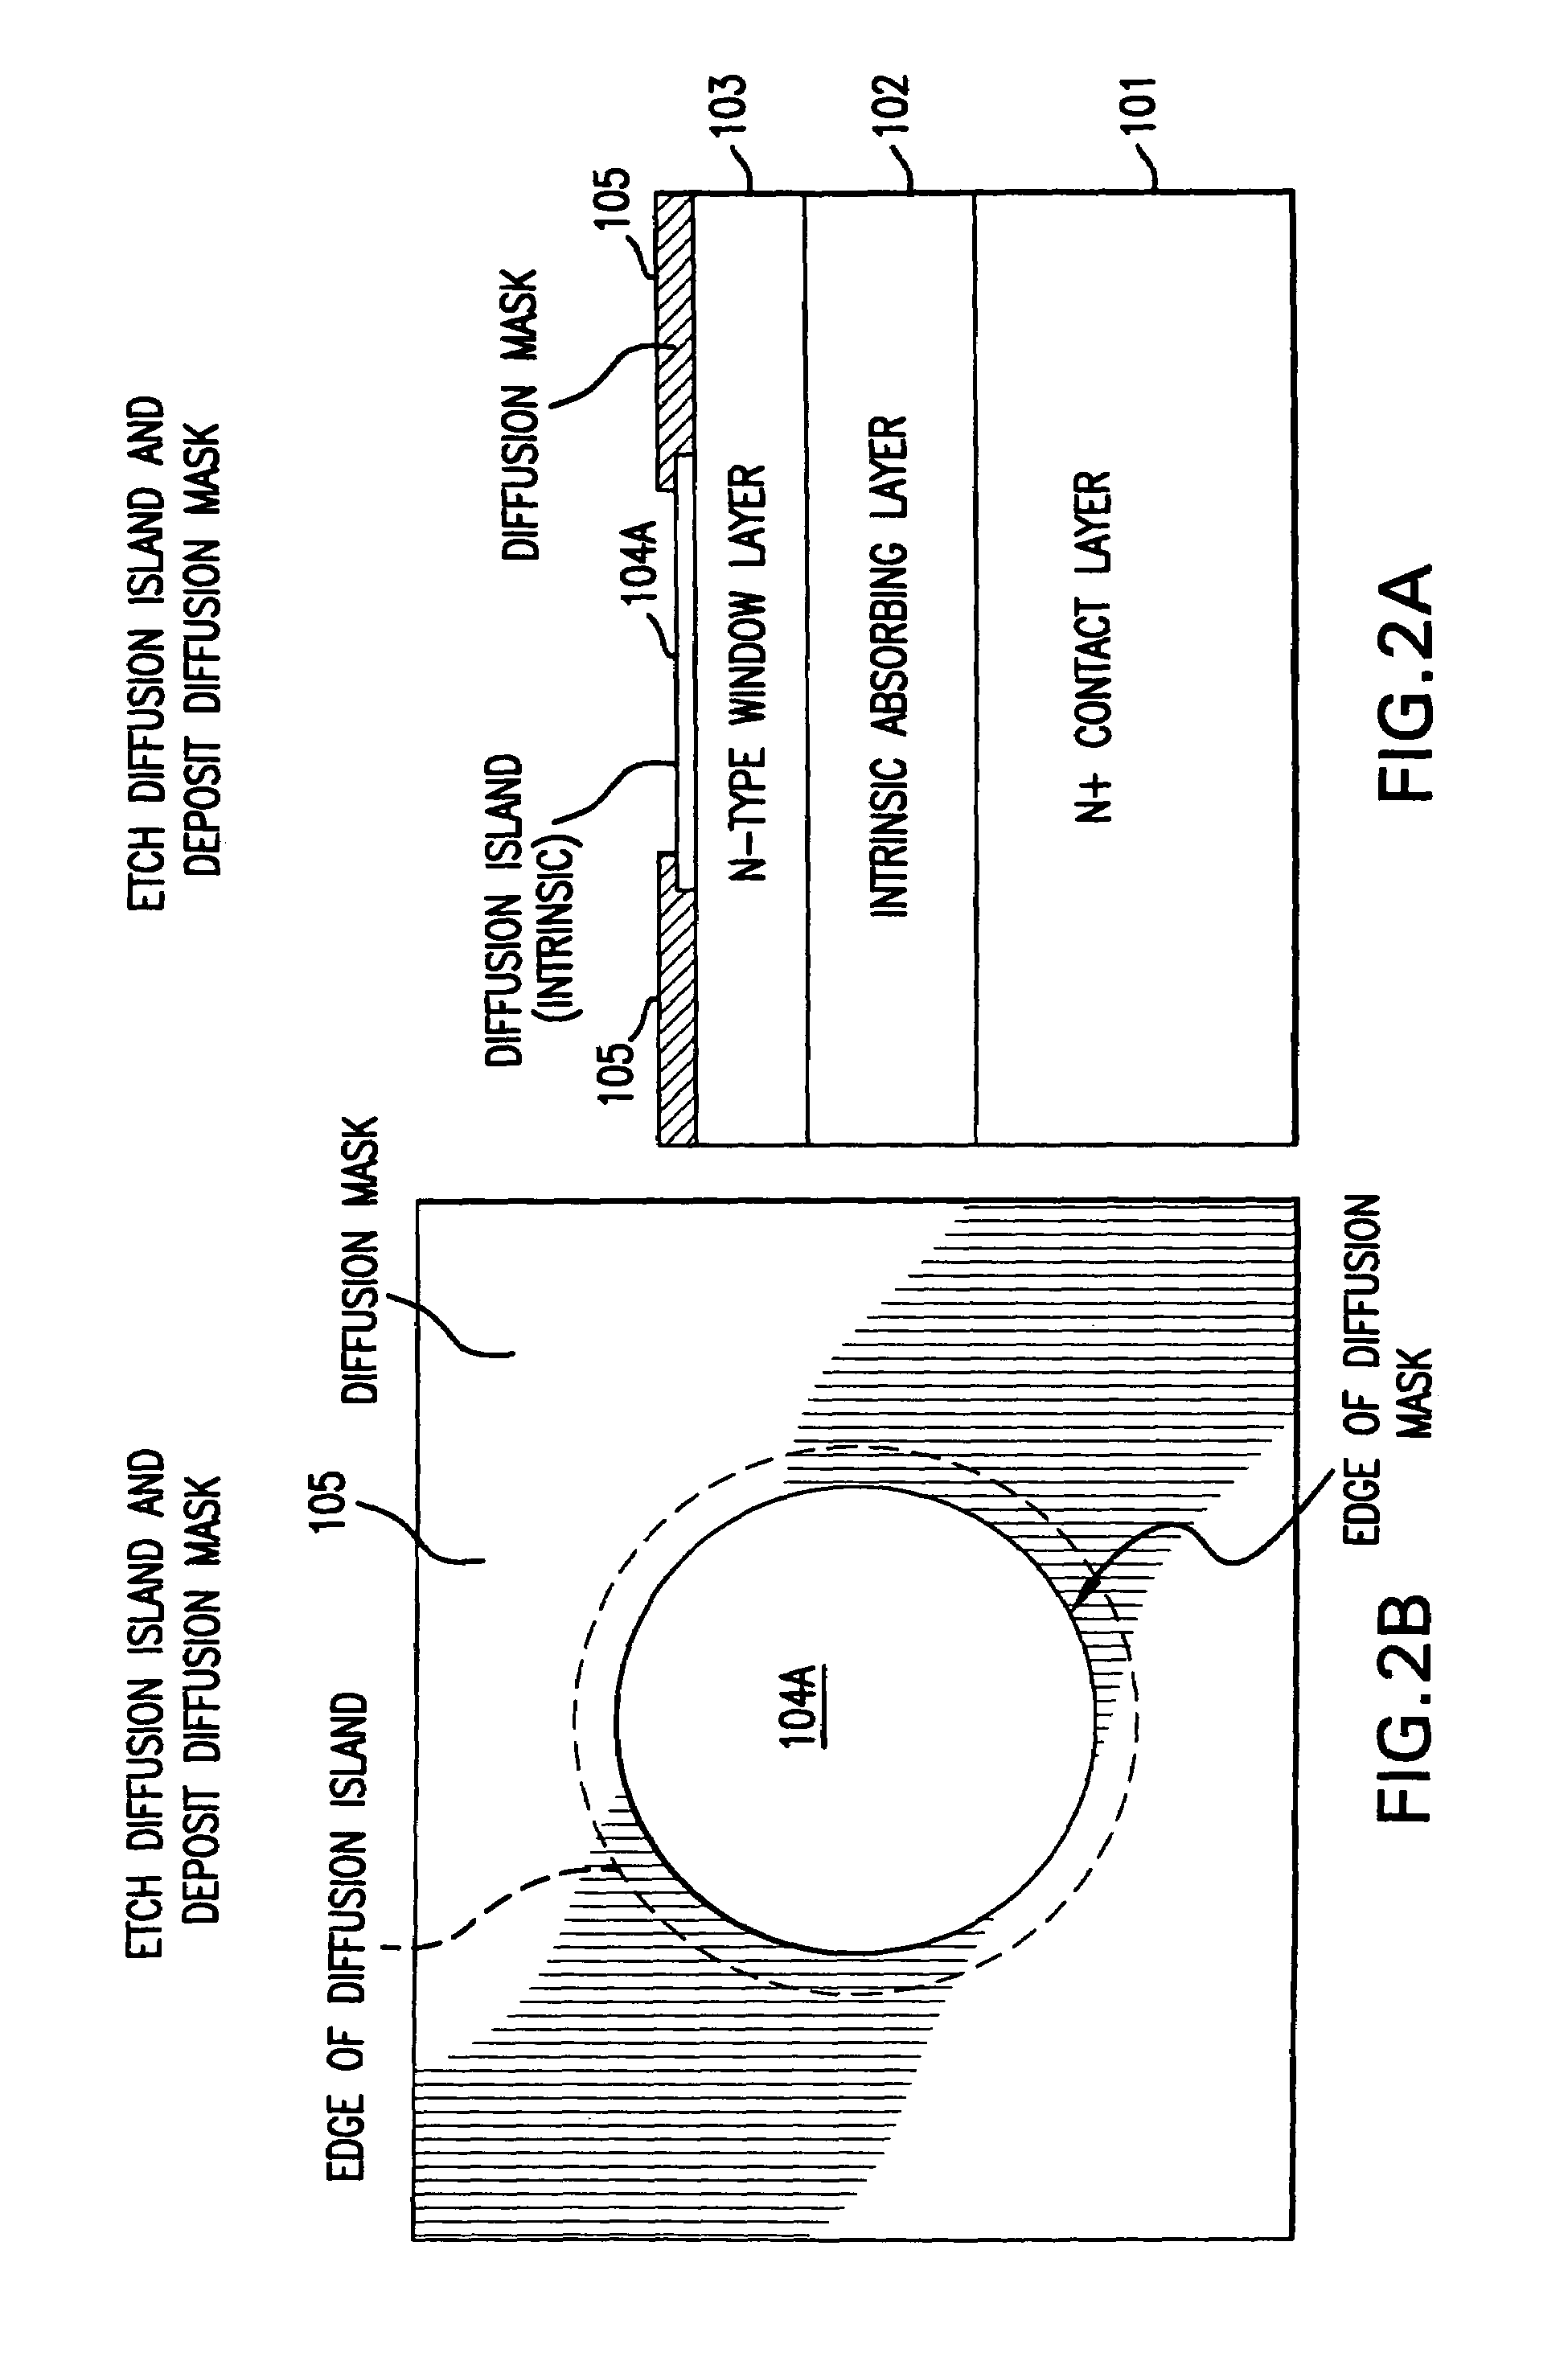 PIN diode structure with zinc diffusion region